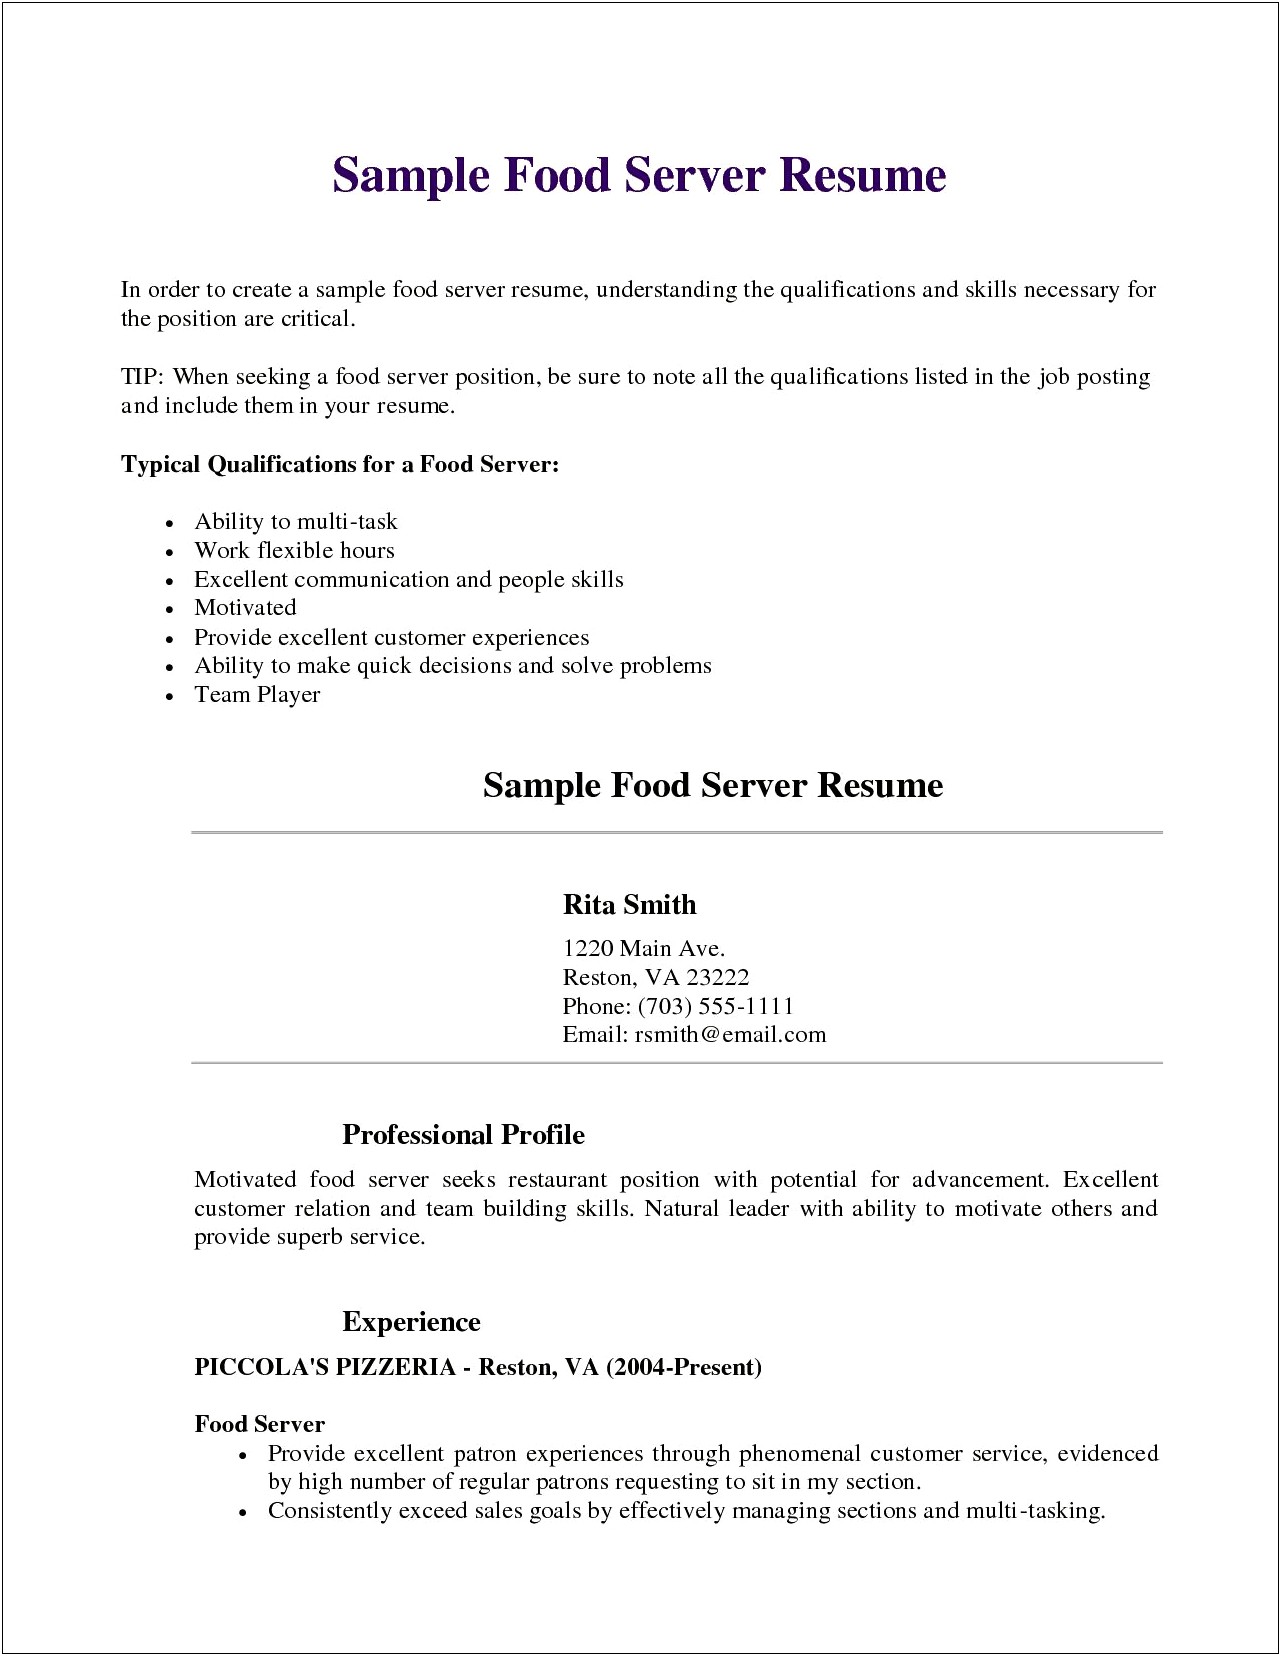 Writing A Resume Working At A Restaurant